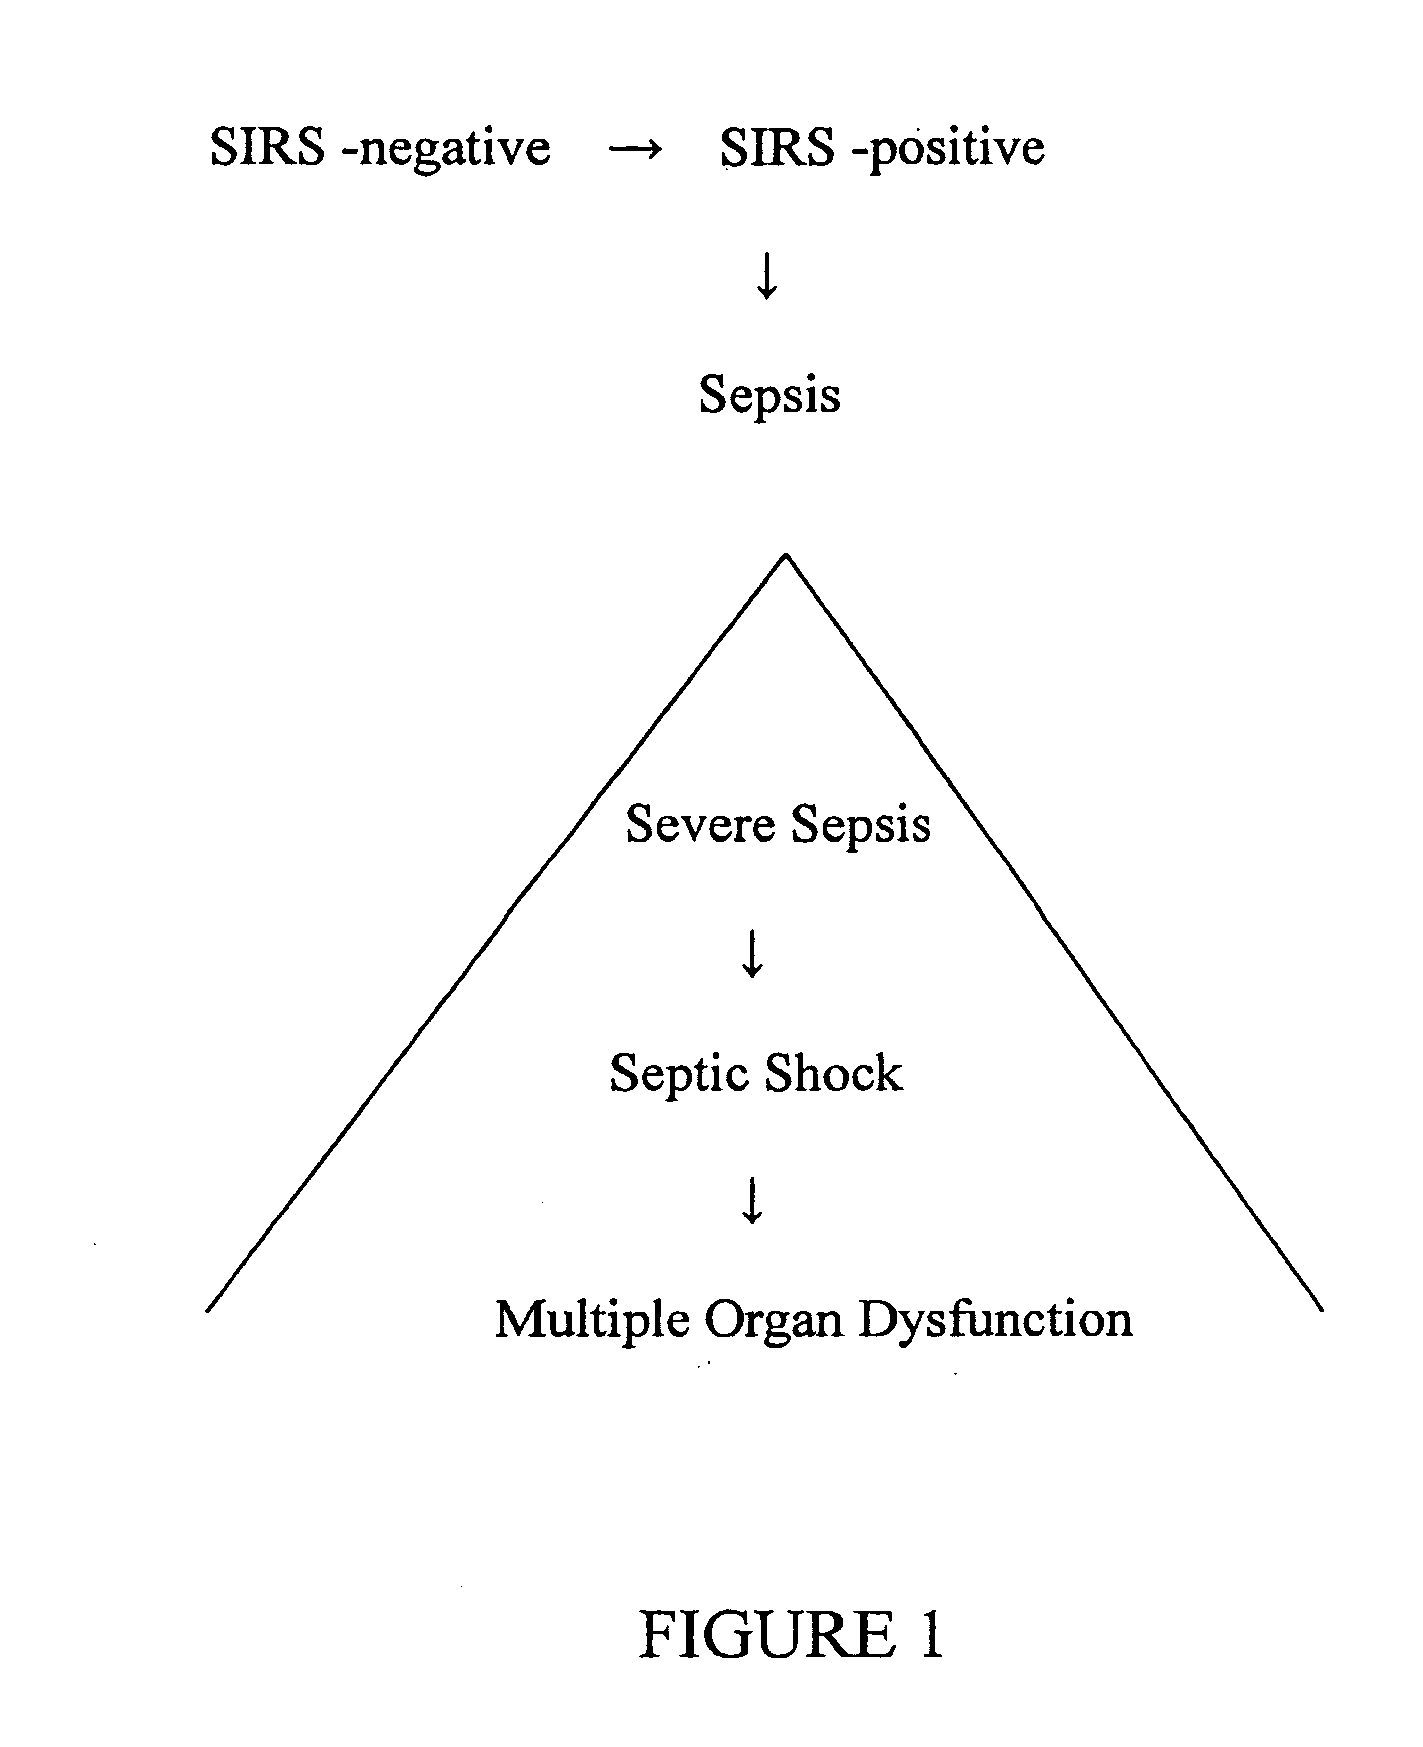 Mass spectrometry techniques for determining the status of sepsis in an individual